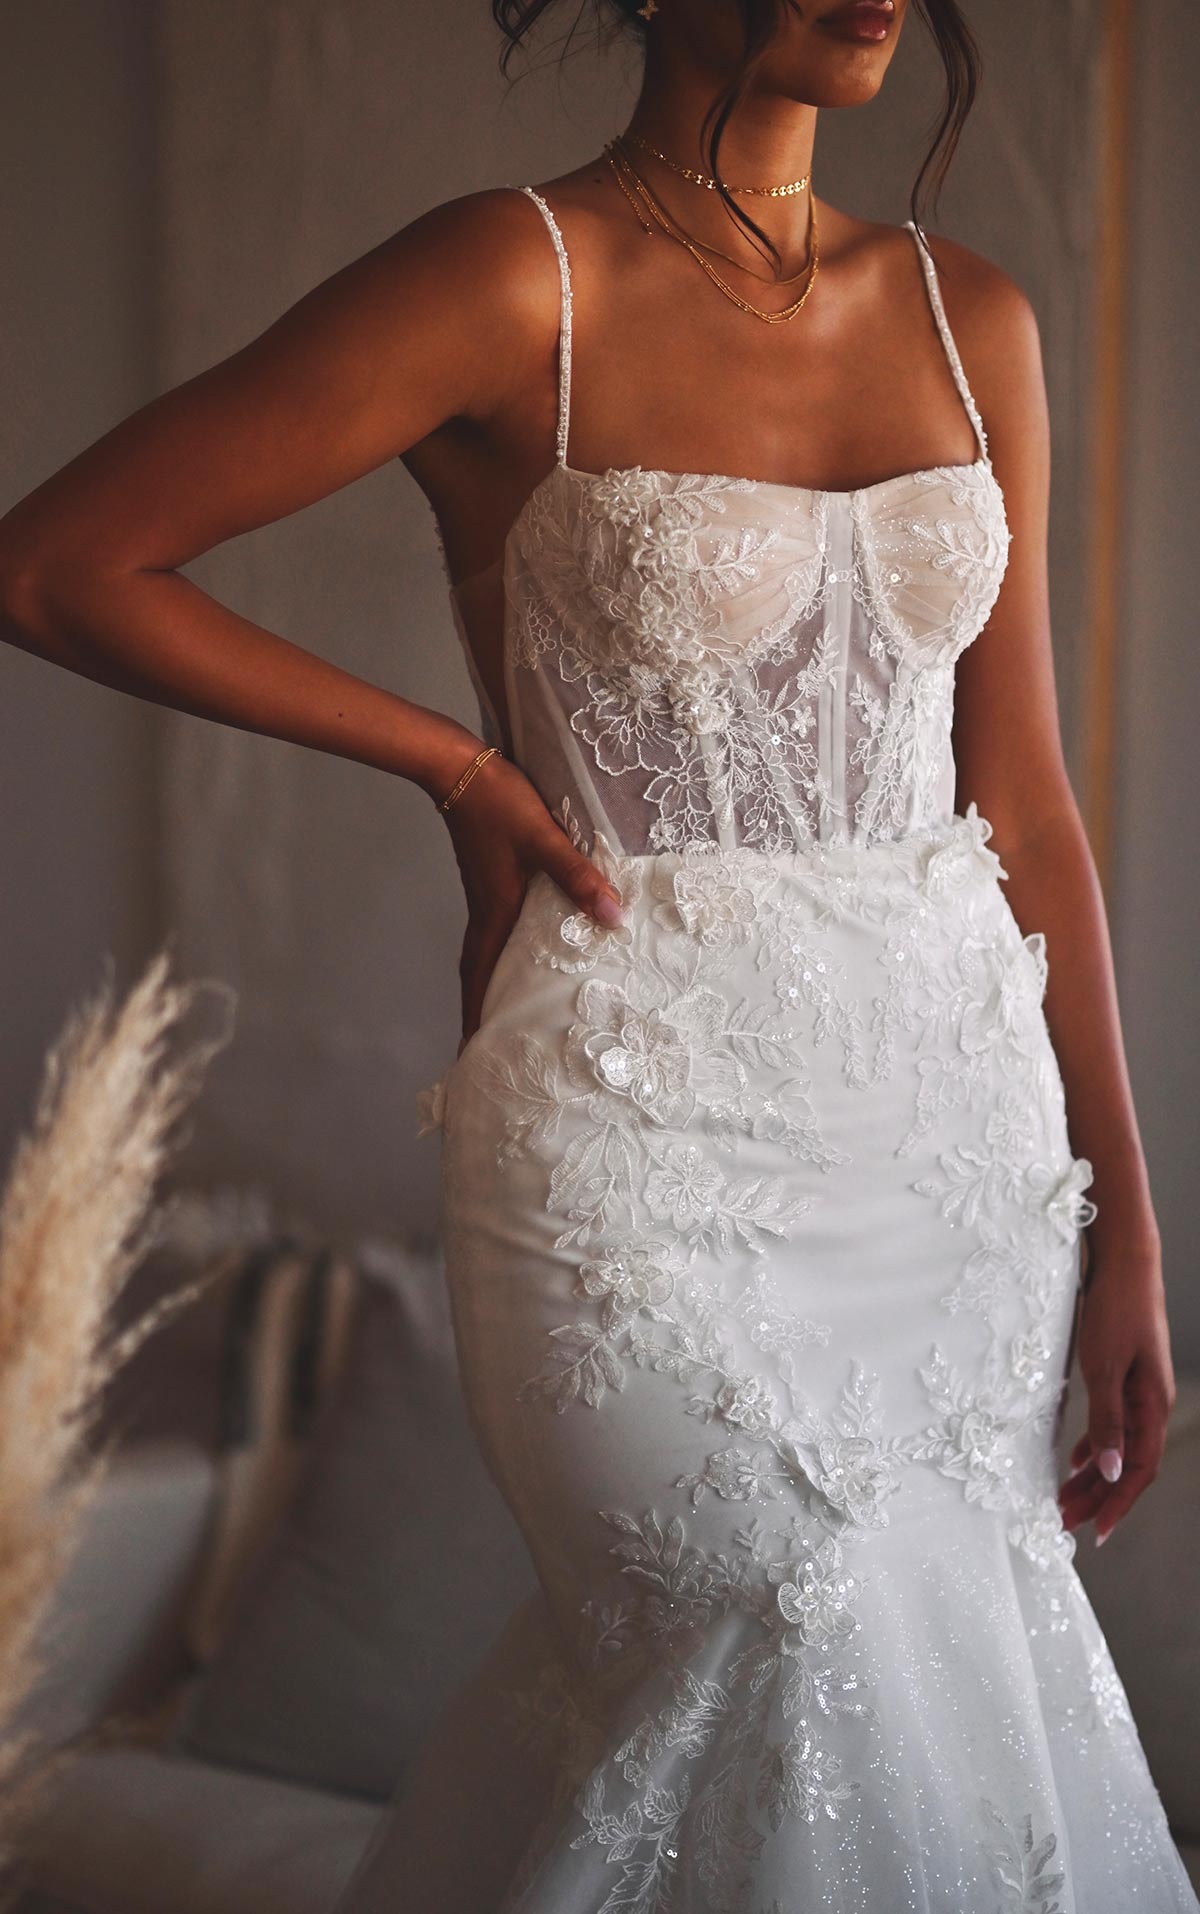 What Is The Best Wedding Dress For Busty Brides? 